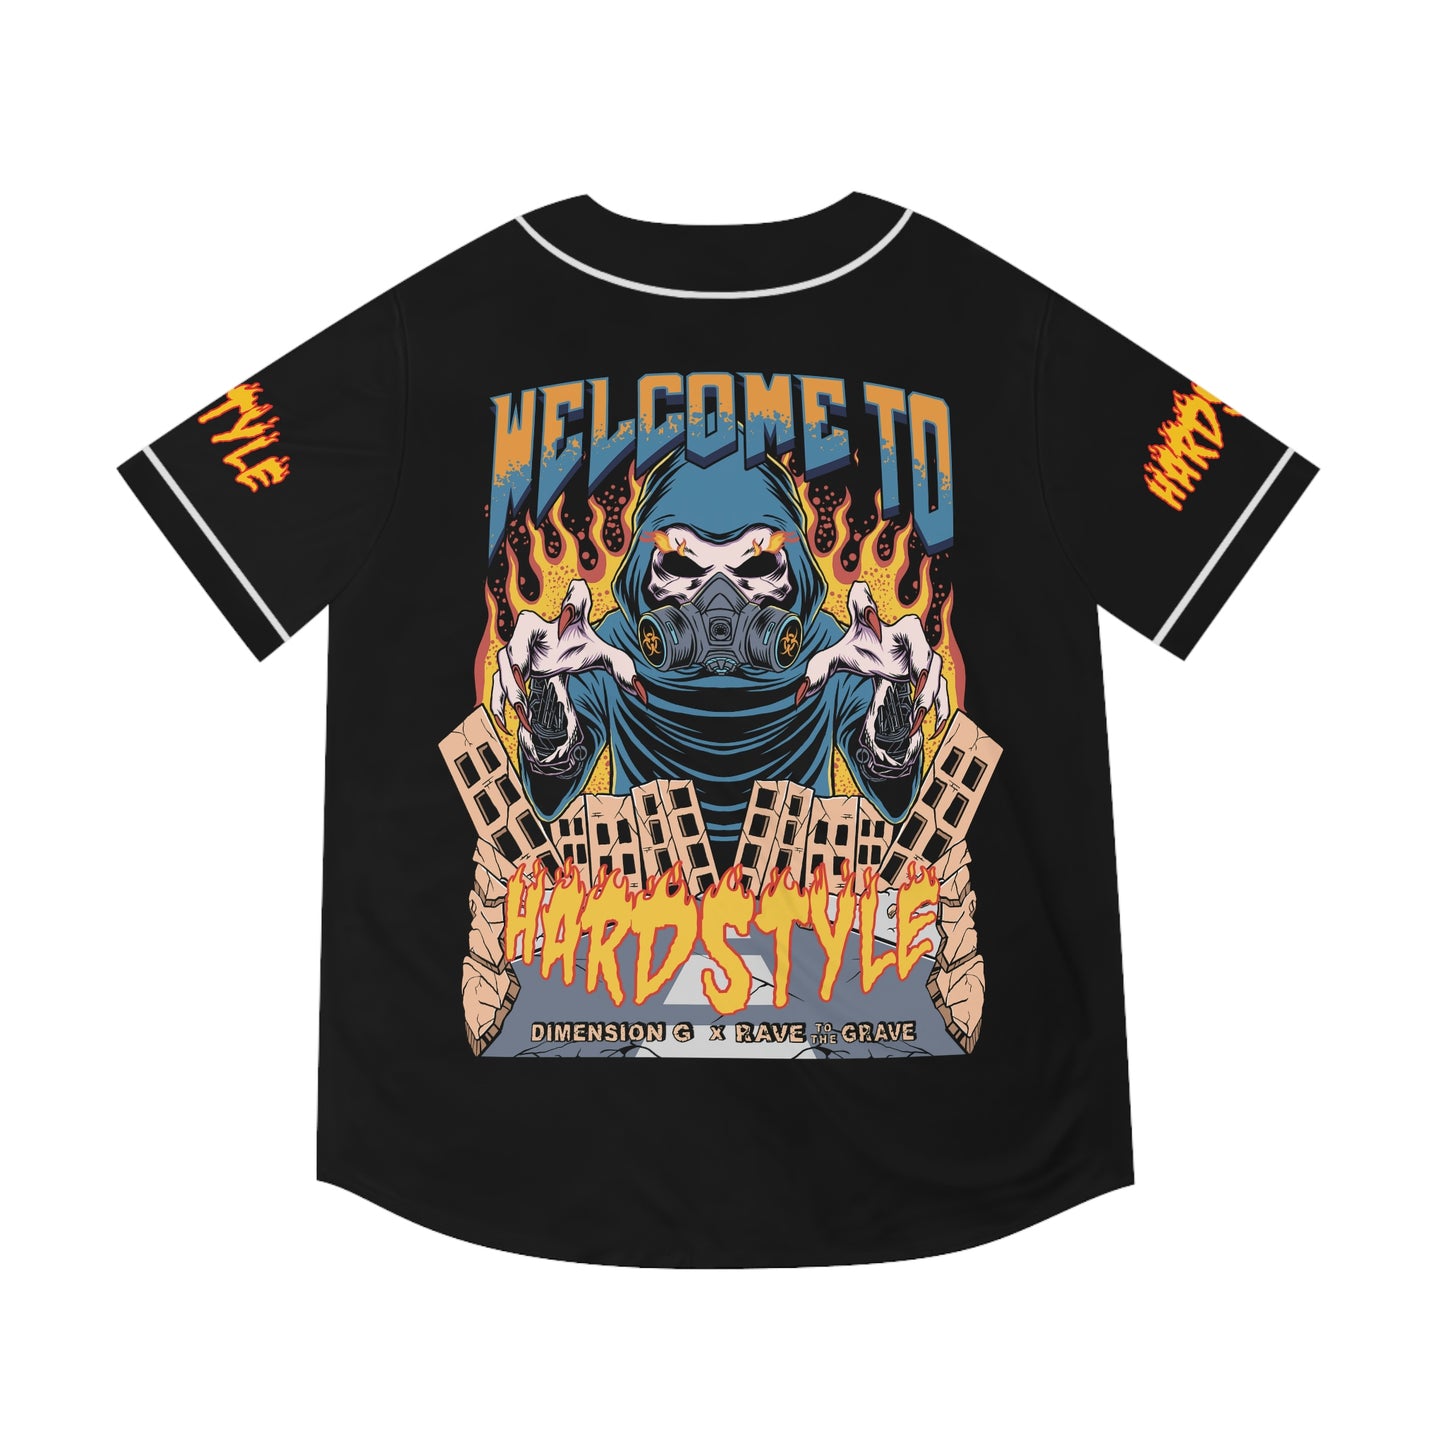 Welcome to Hardstyle Jersey